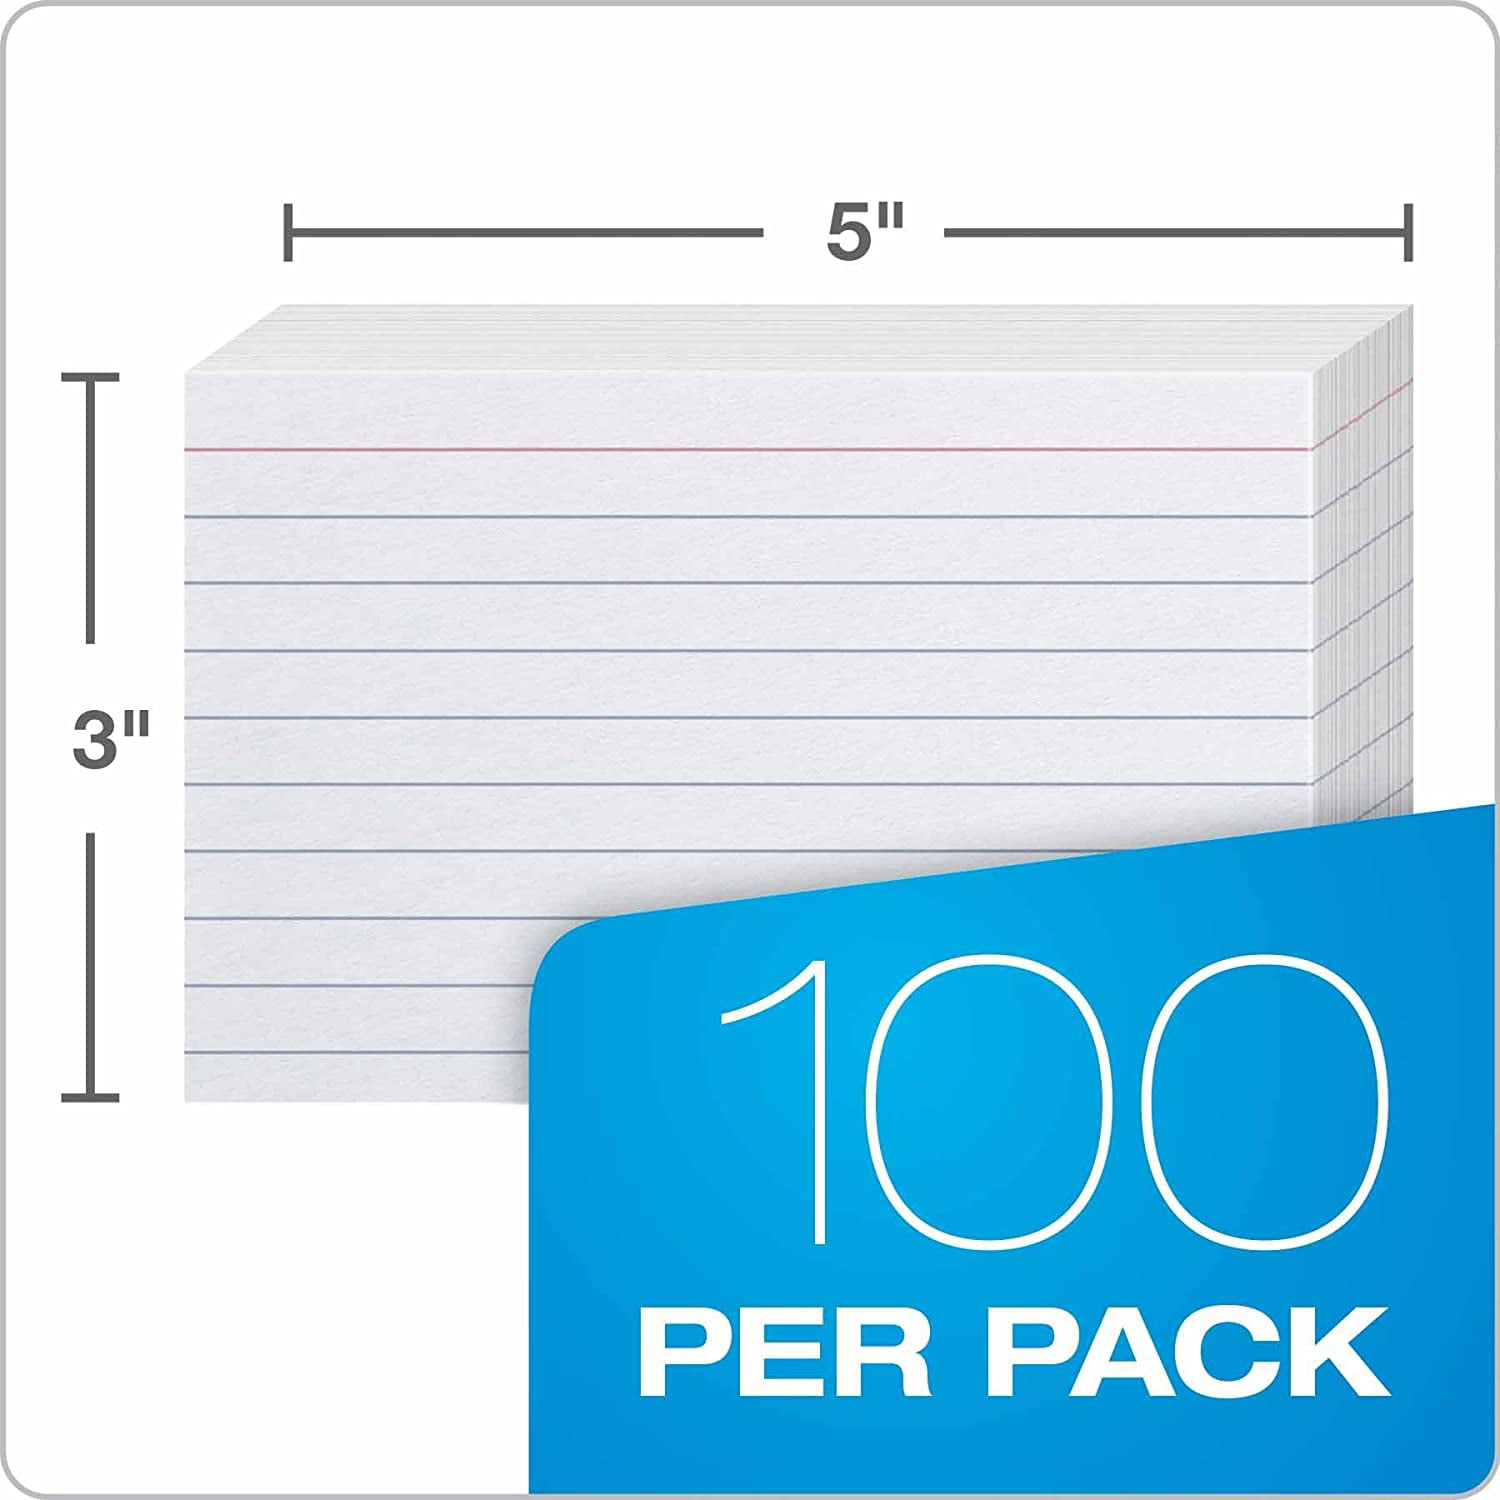 3 x 5 10 Packs of 100" White Oxford "Ruled Index Cards 